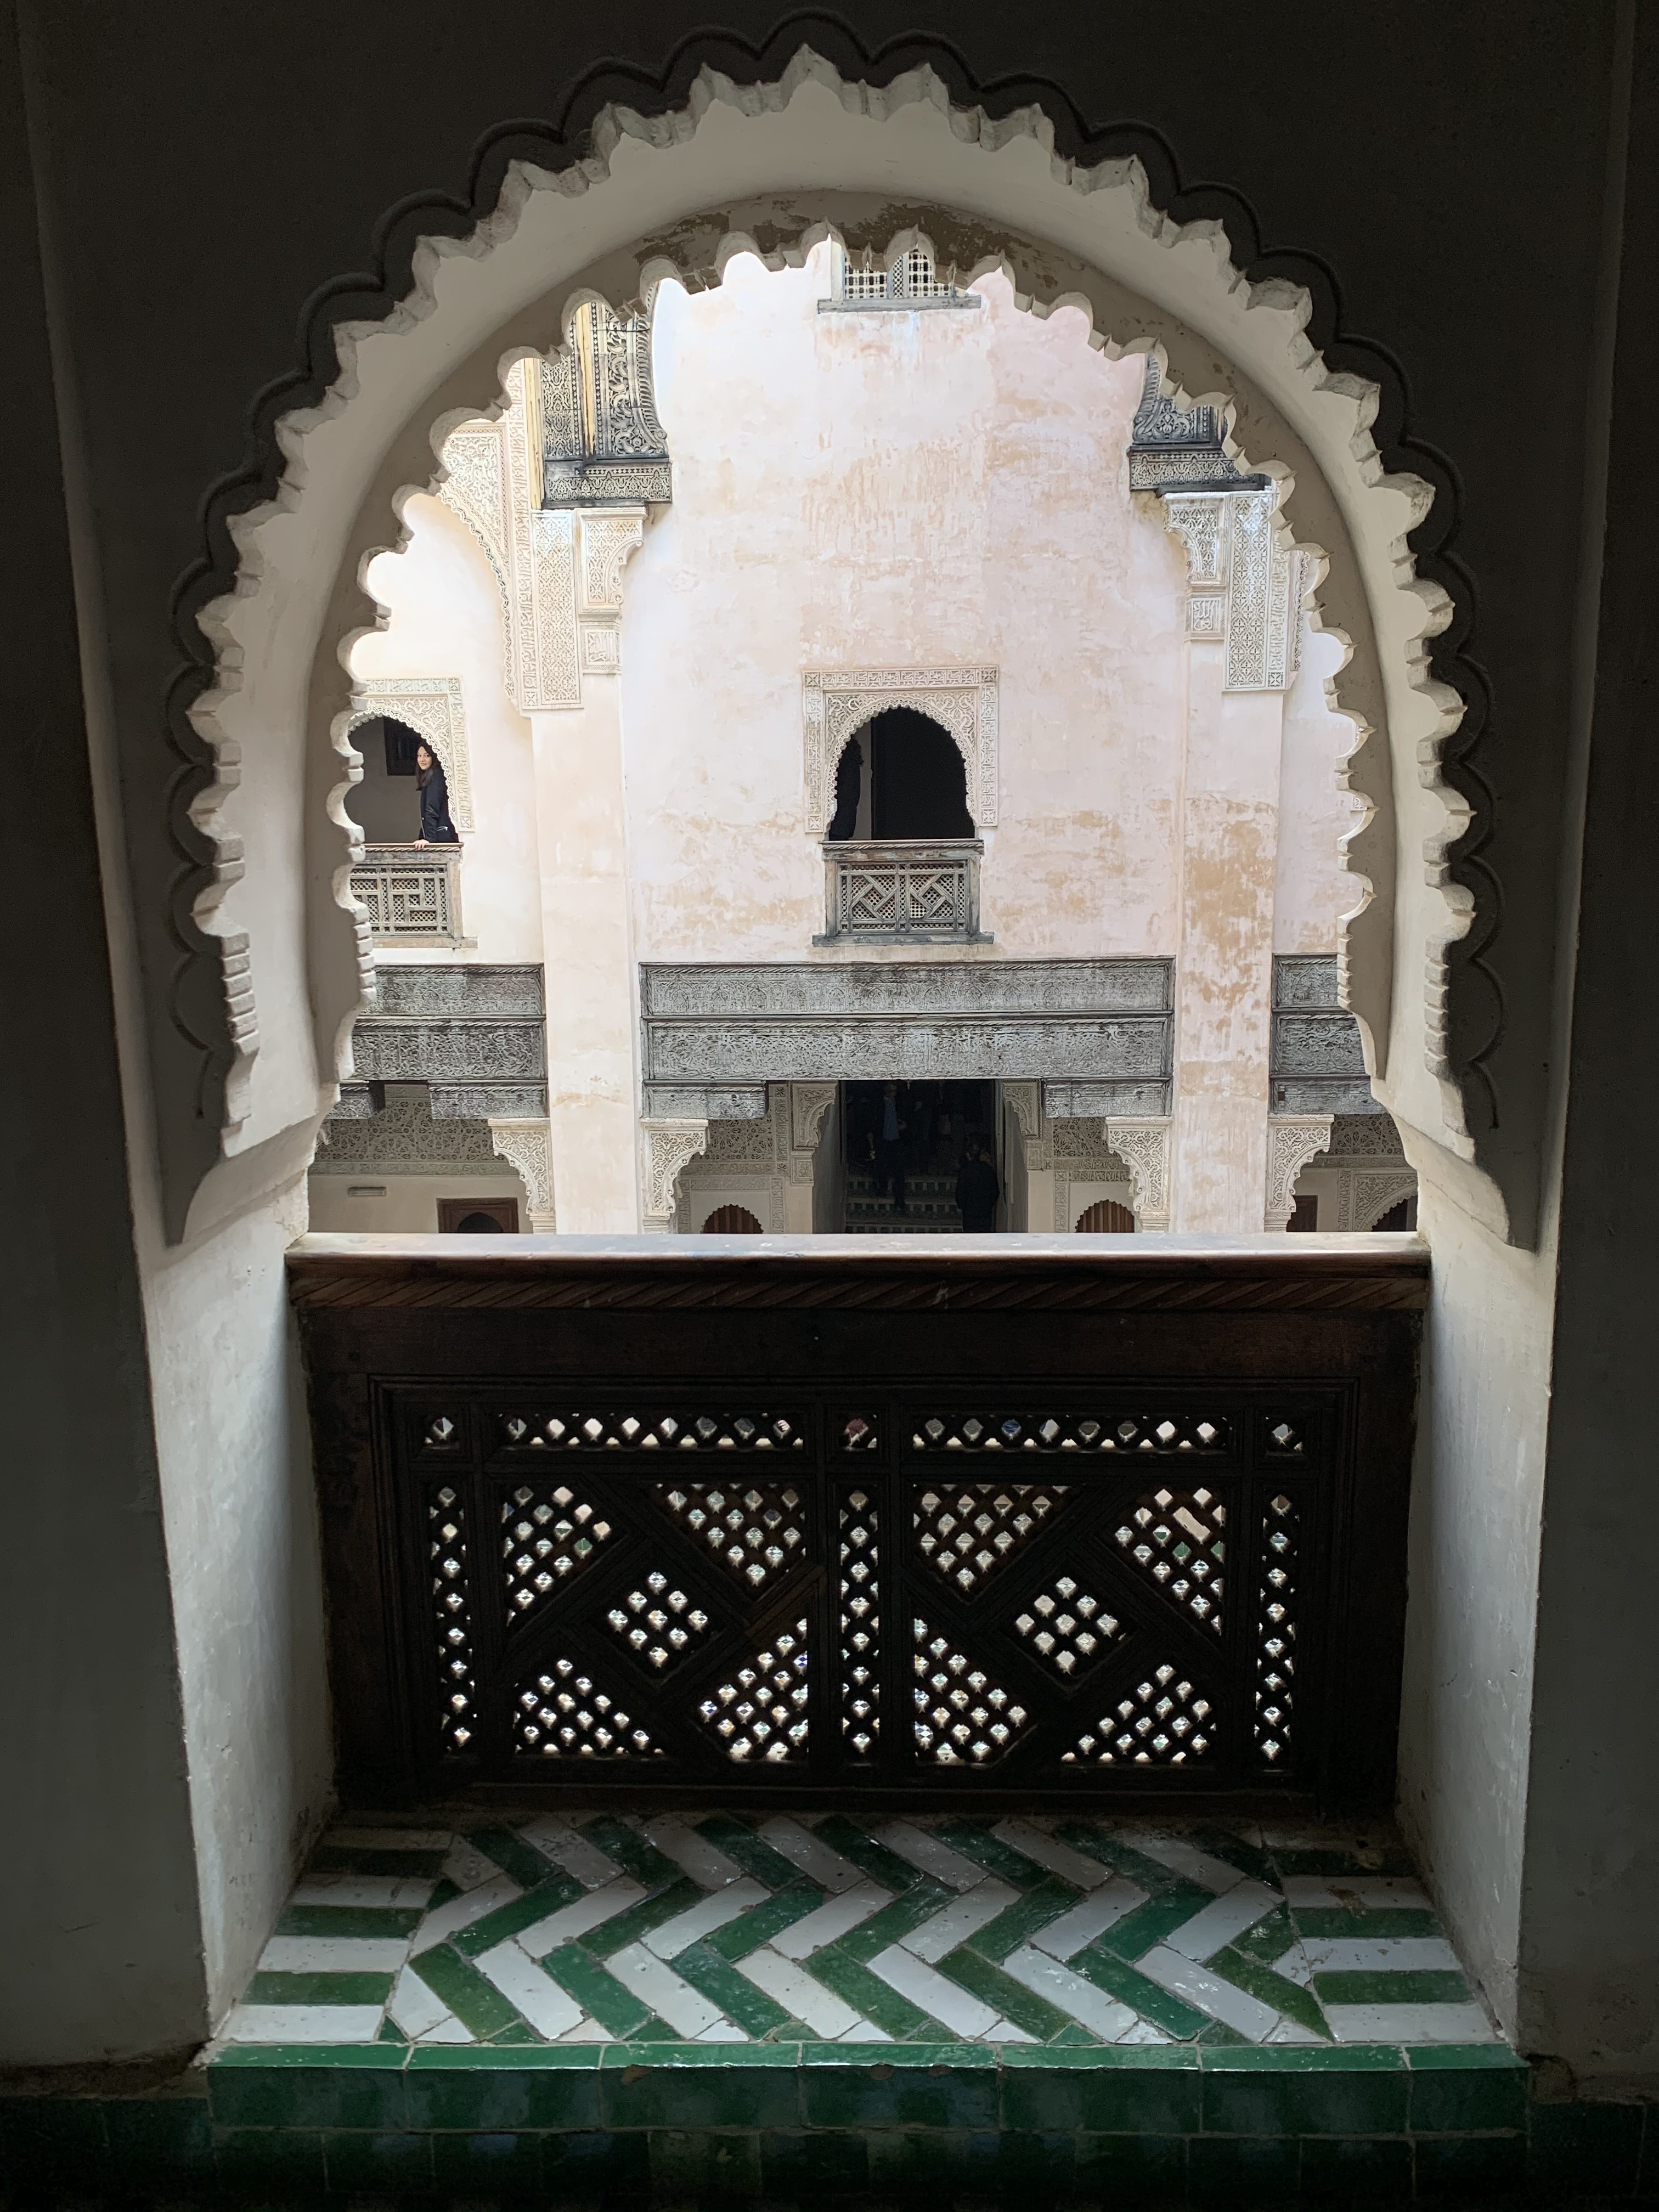 Madrasa in Fez. Looking out over a balcony to balconies across the street.